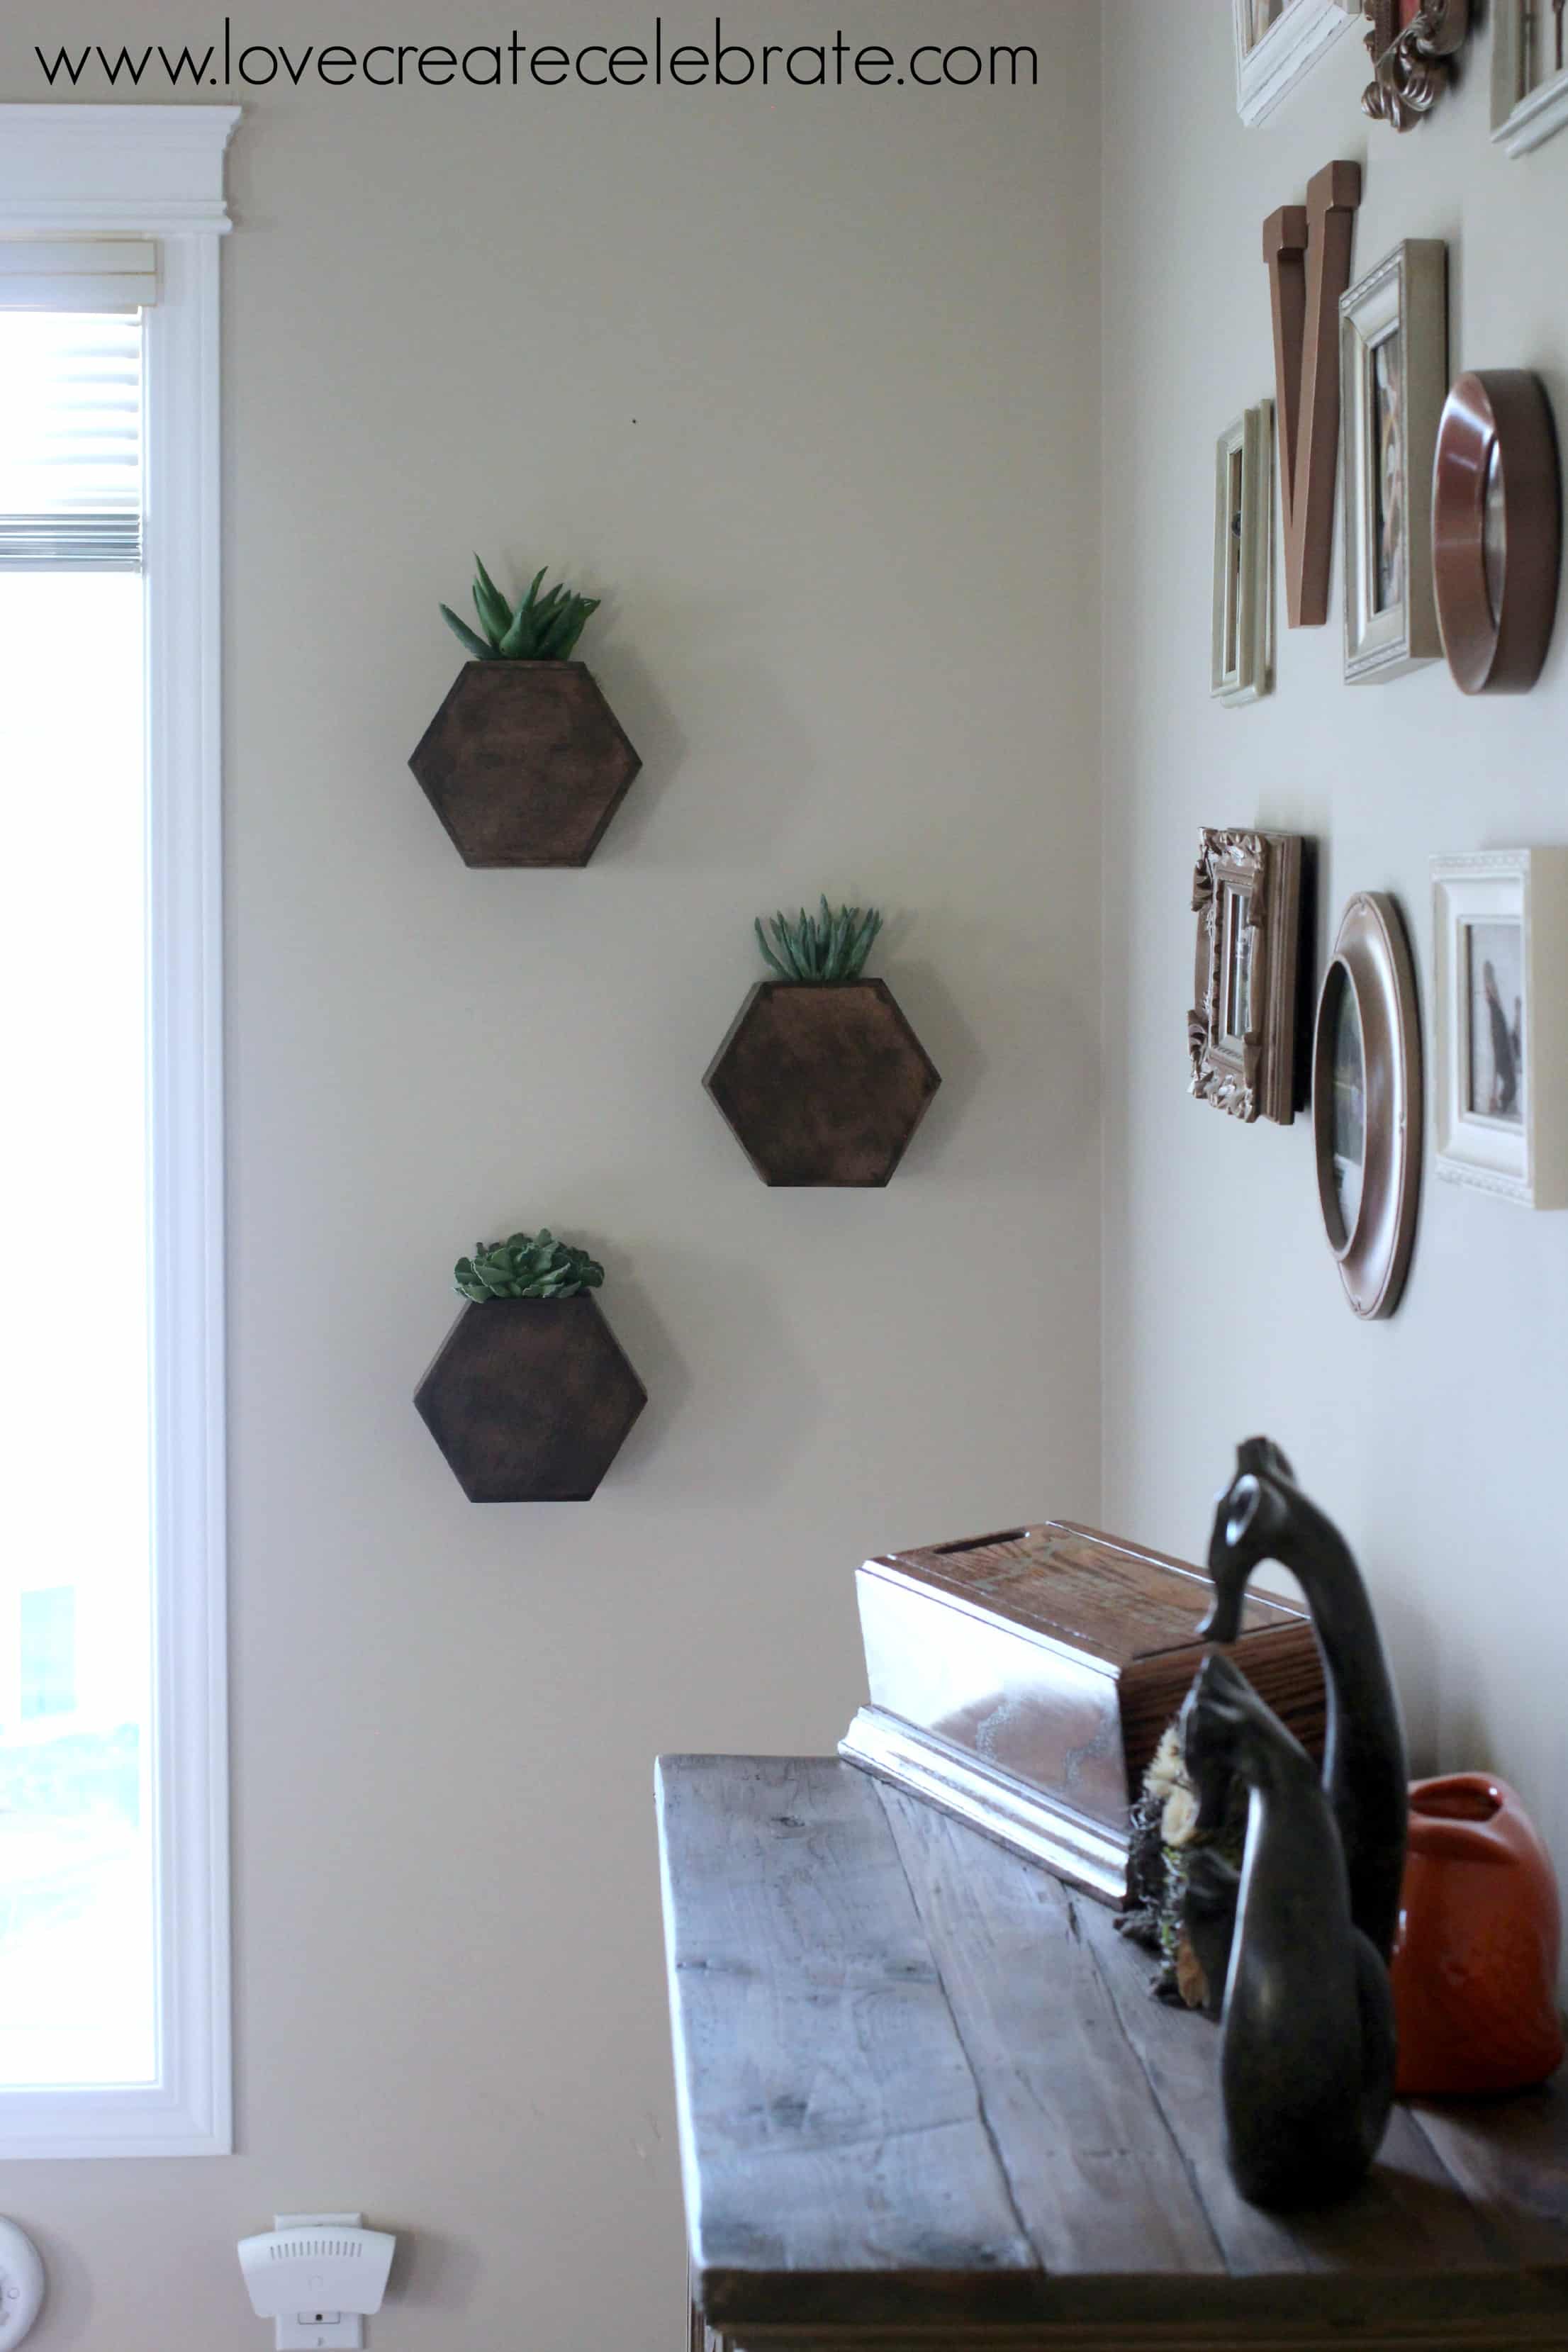 My finished hexagon wall planters hung on the wall 